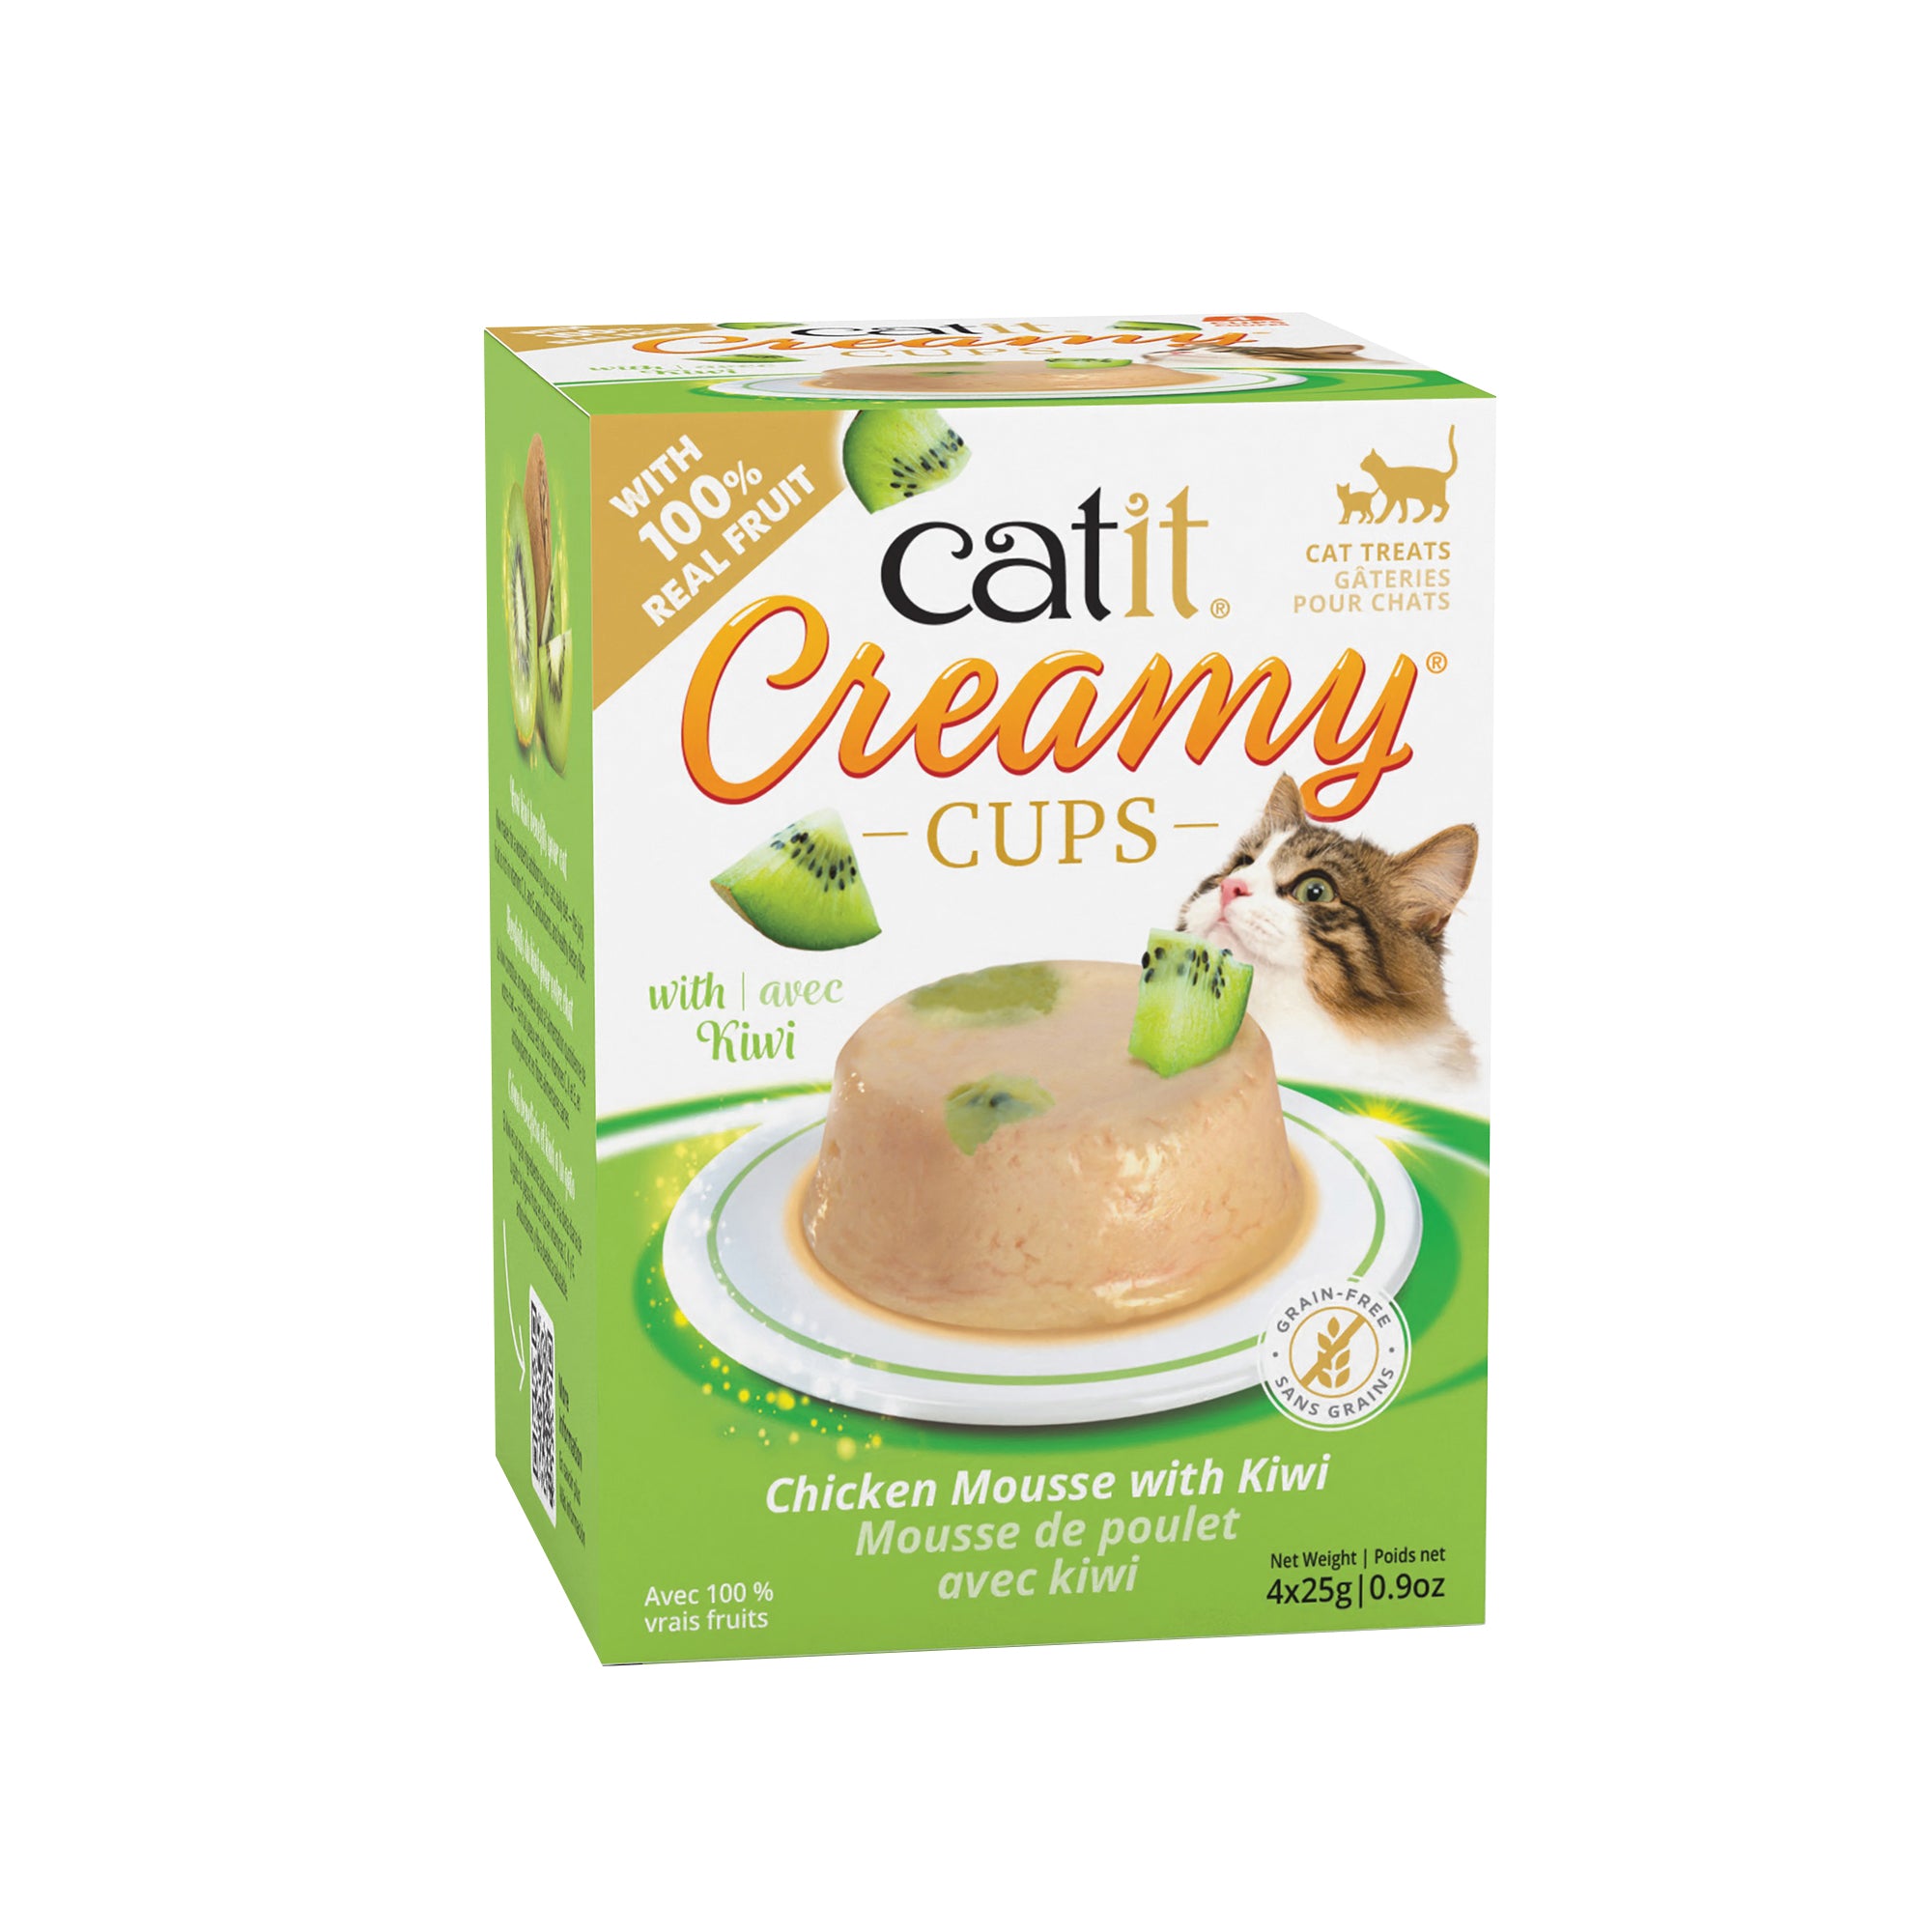 Catit Creamy Cups - Chicken Mousse with Kiwi - 4 x 25g